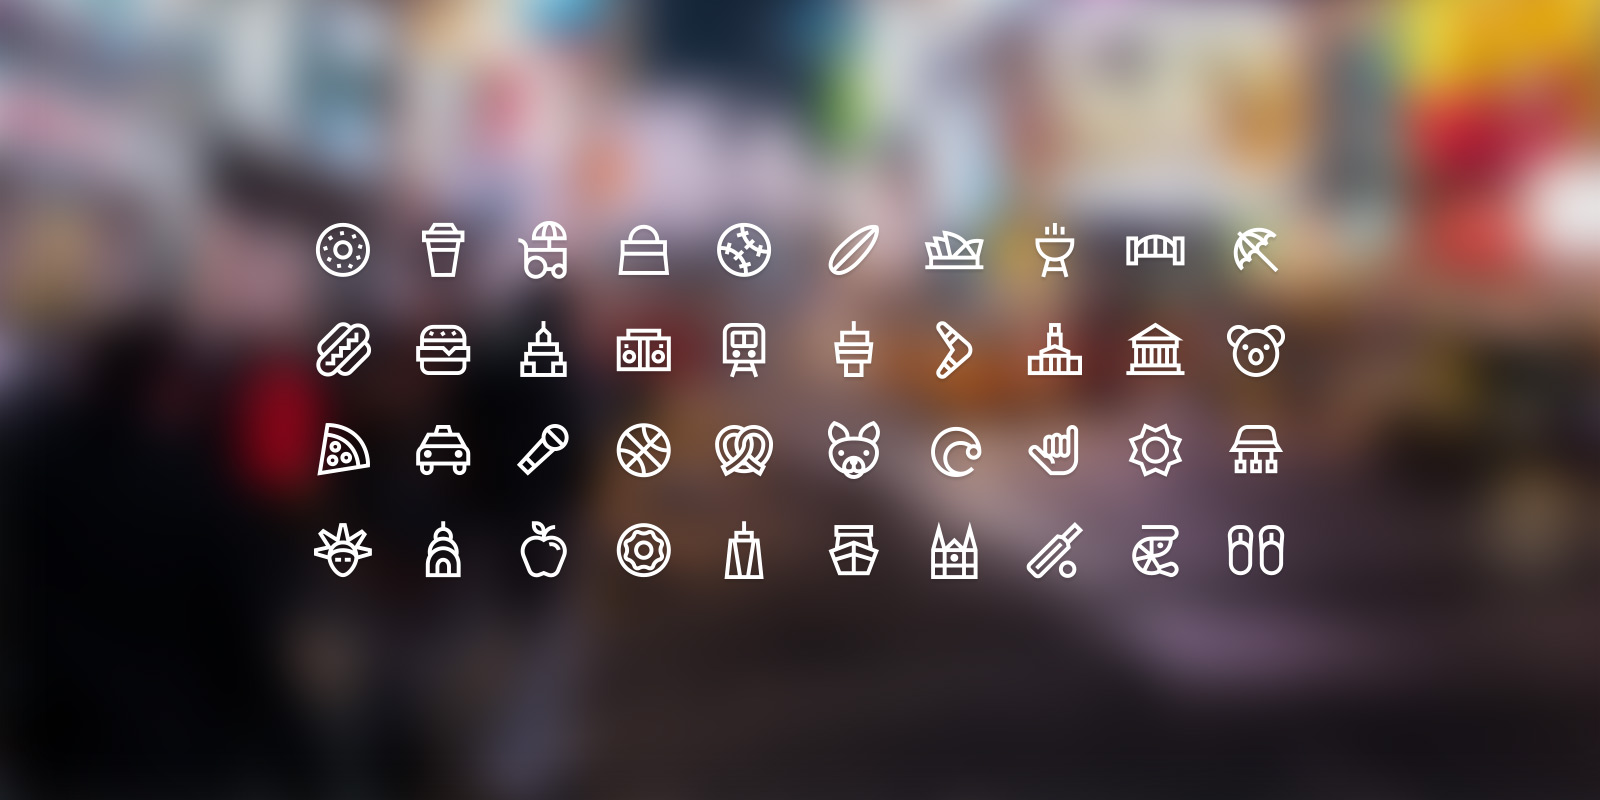 Citysets – 80 free city-based icons for Sketch and Illustrator